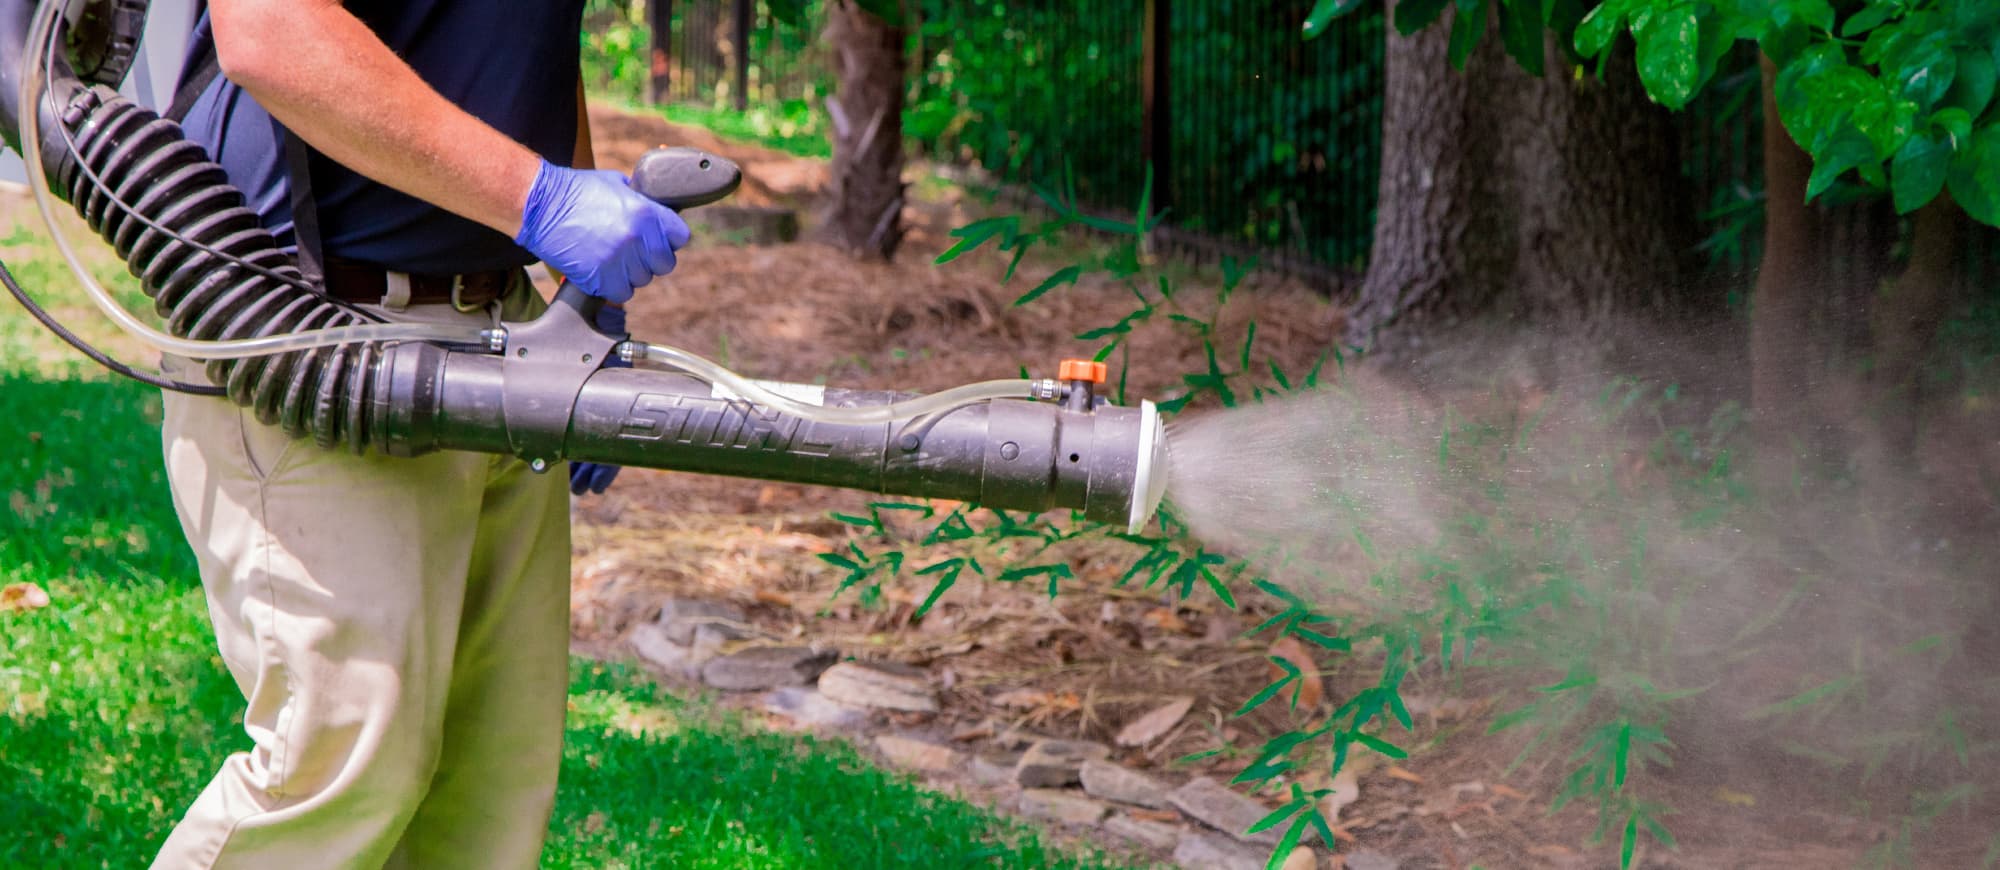 pest exterminator spraying yard for mosquitoes